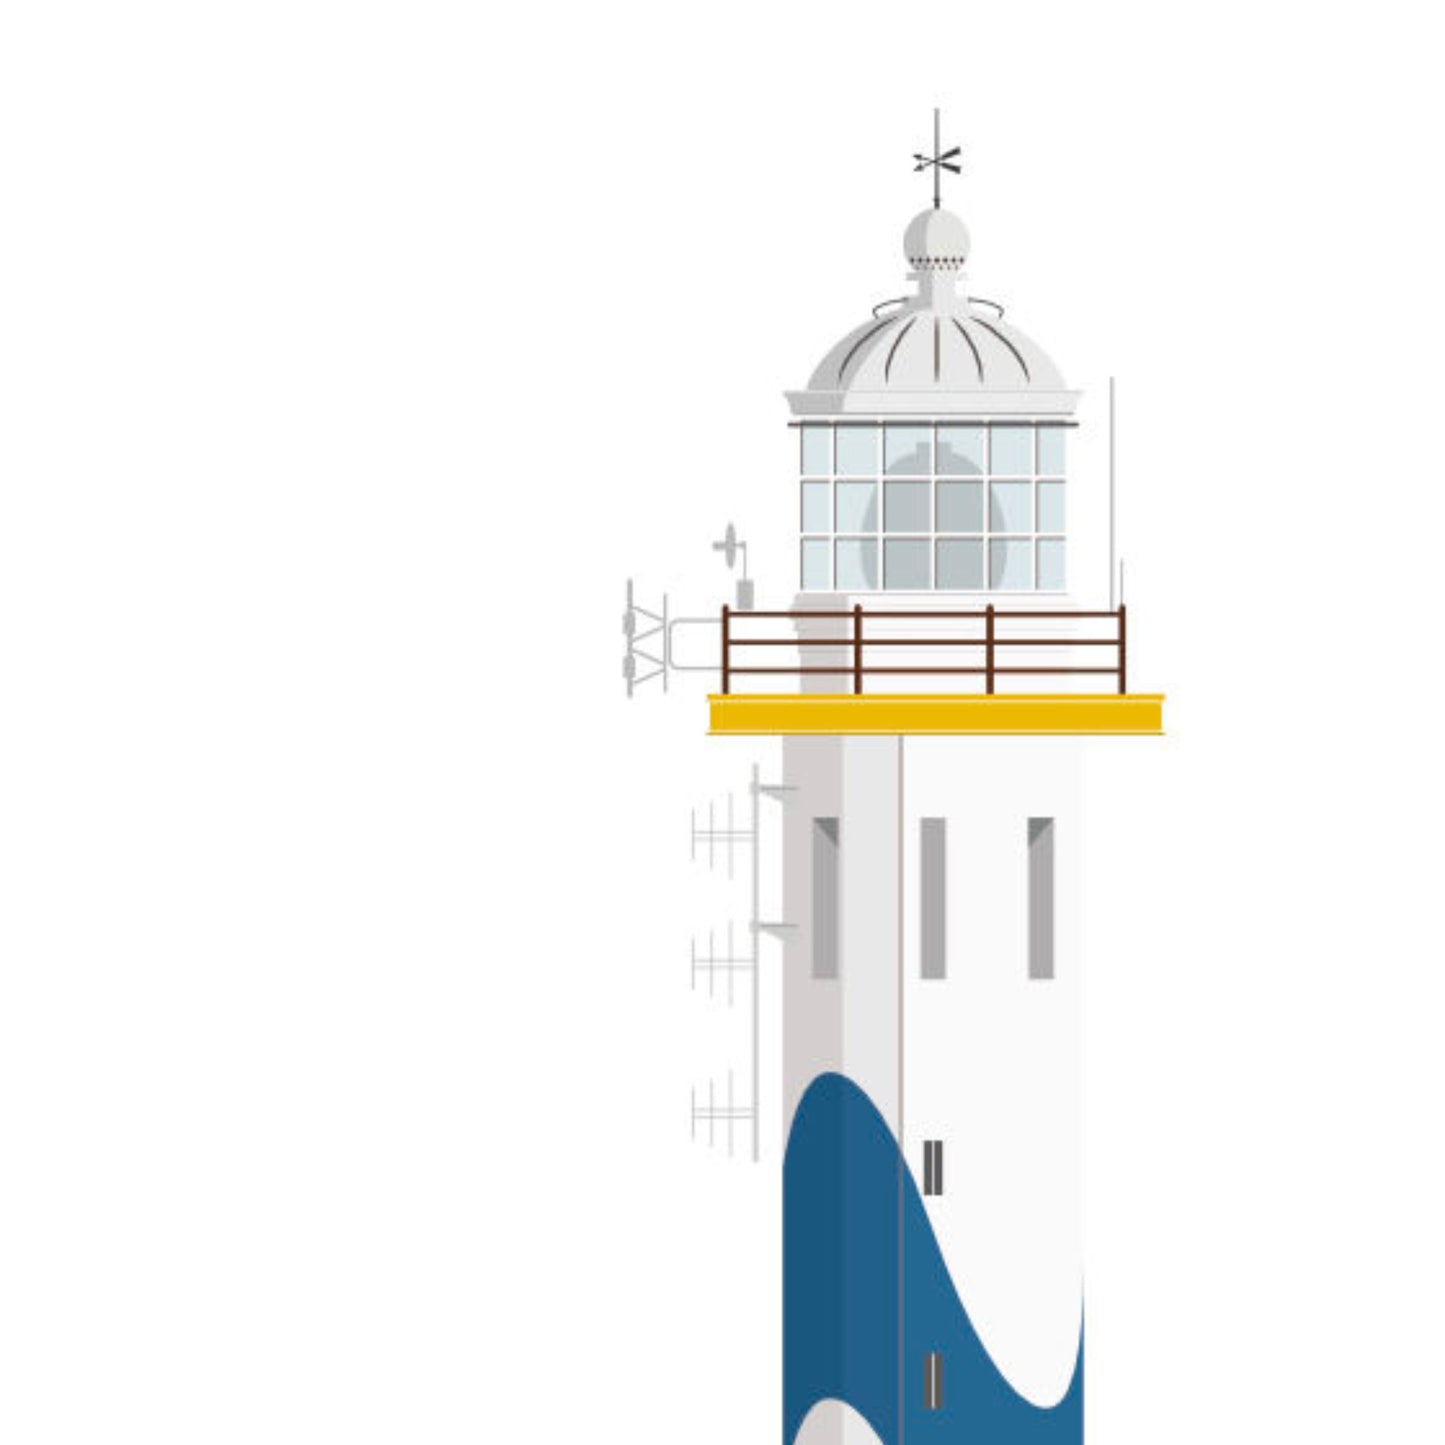 Detail of the Lange Nelle lighthouse in Oostend, Belgium, with blue waves pattern painted onto it. On a white background with aqua blue circle as a backdrop.